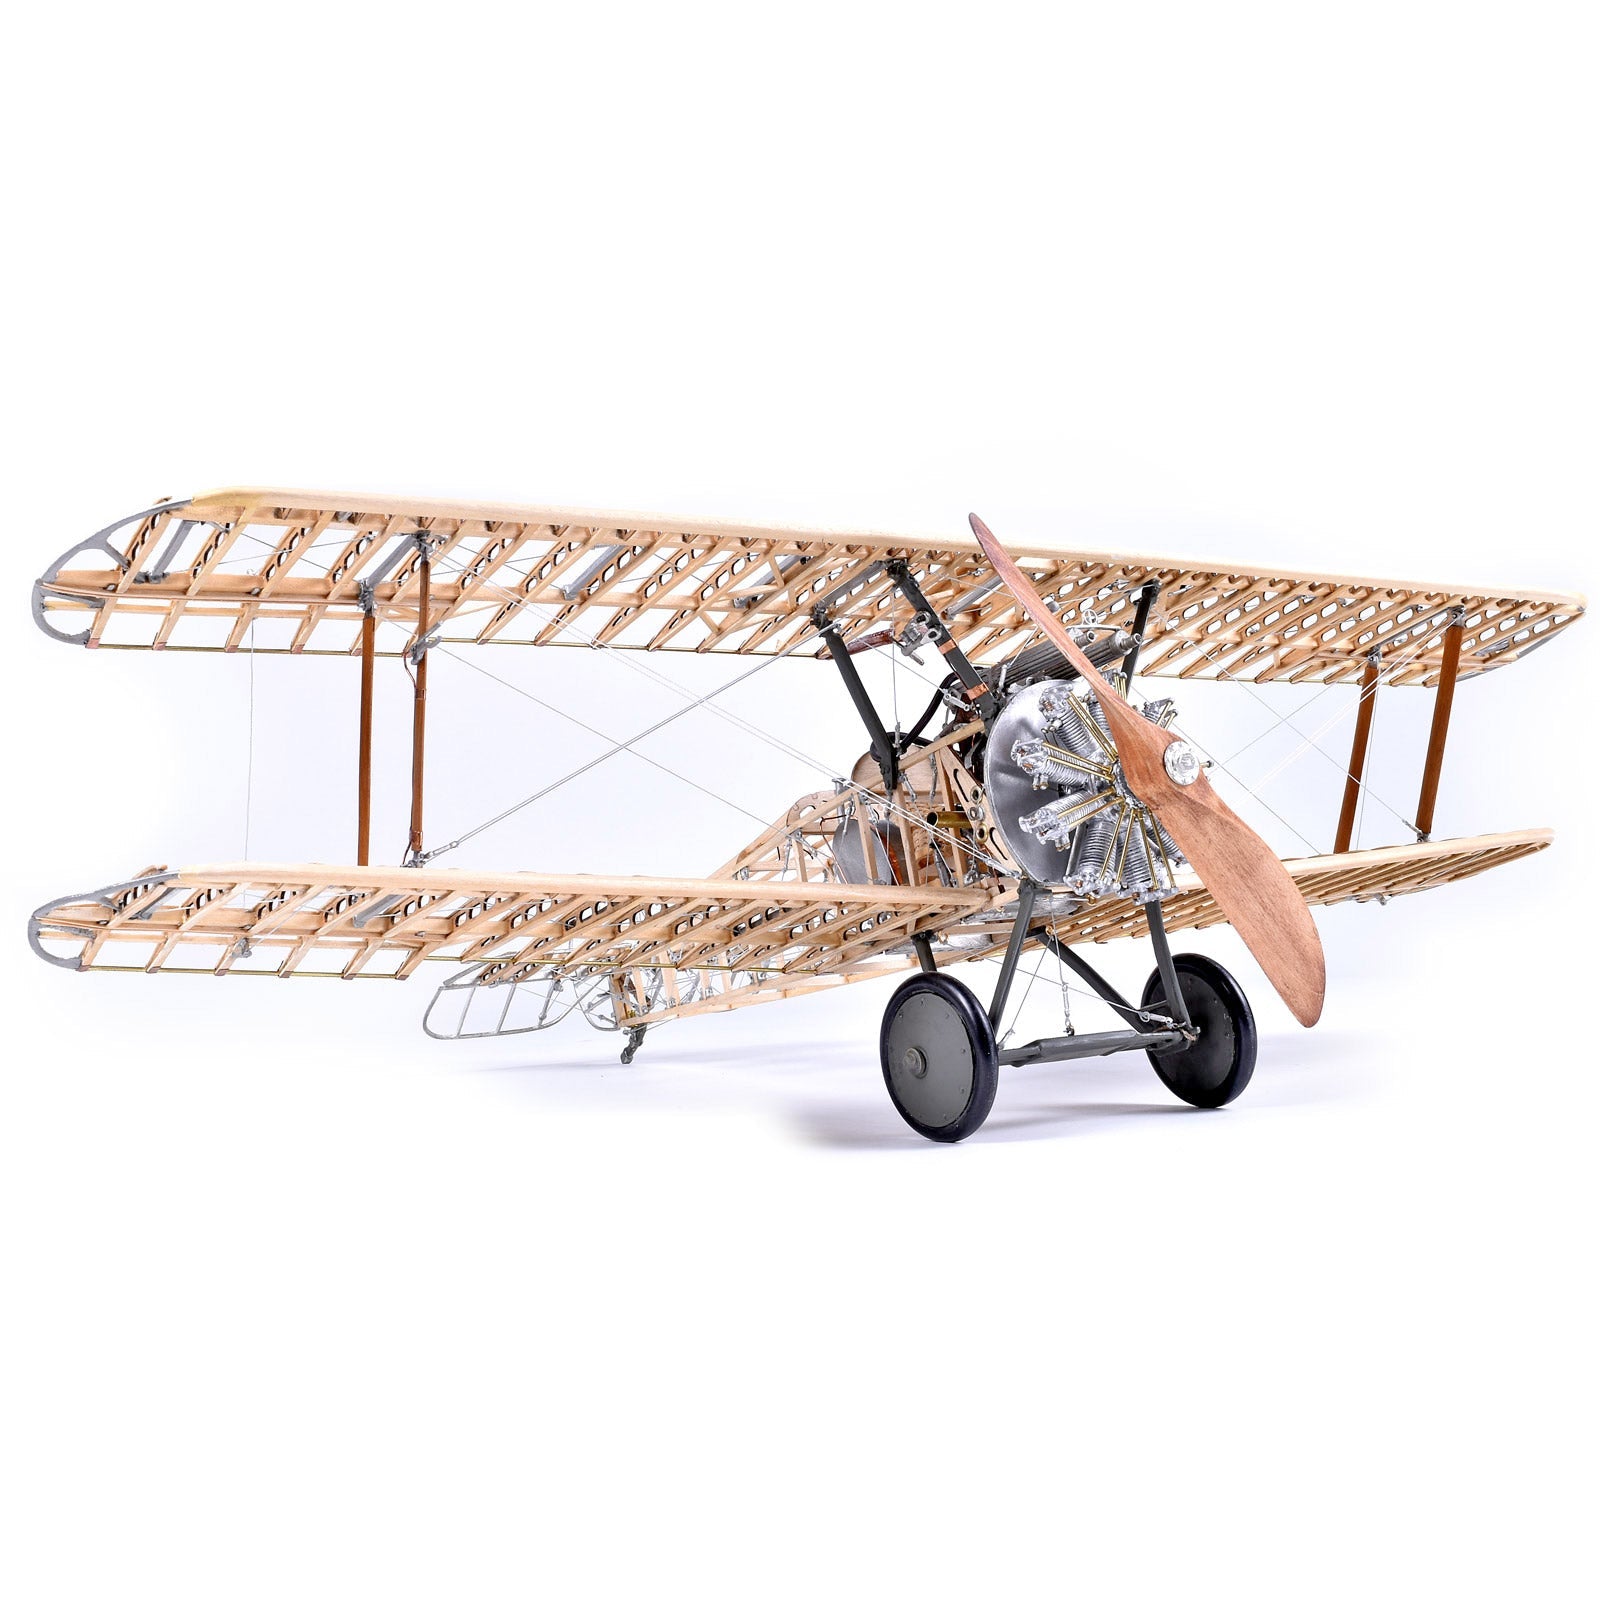 Model Airways Sopwith Camel, WWI British Fighter, 1:16 Scale - Micro - Mark Scale Model Kits